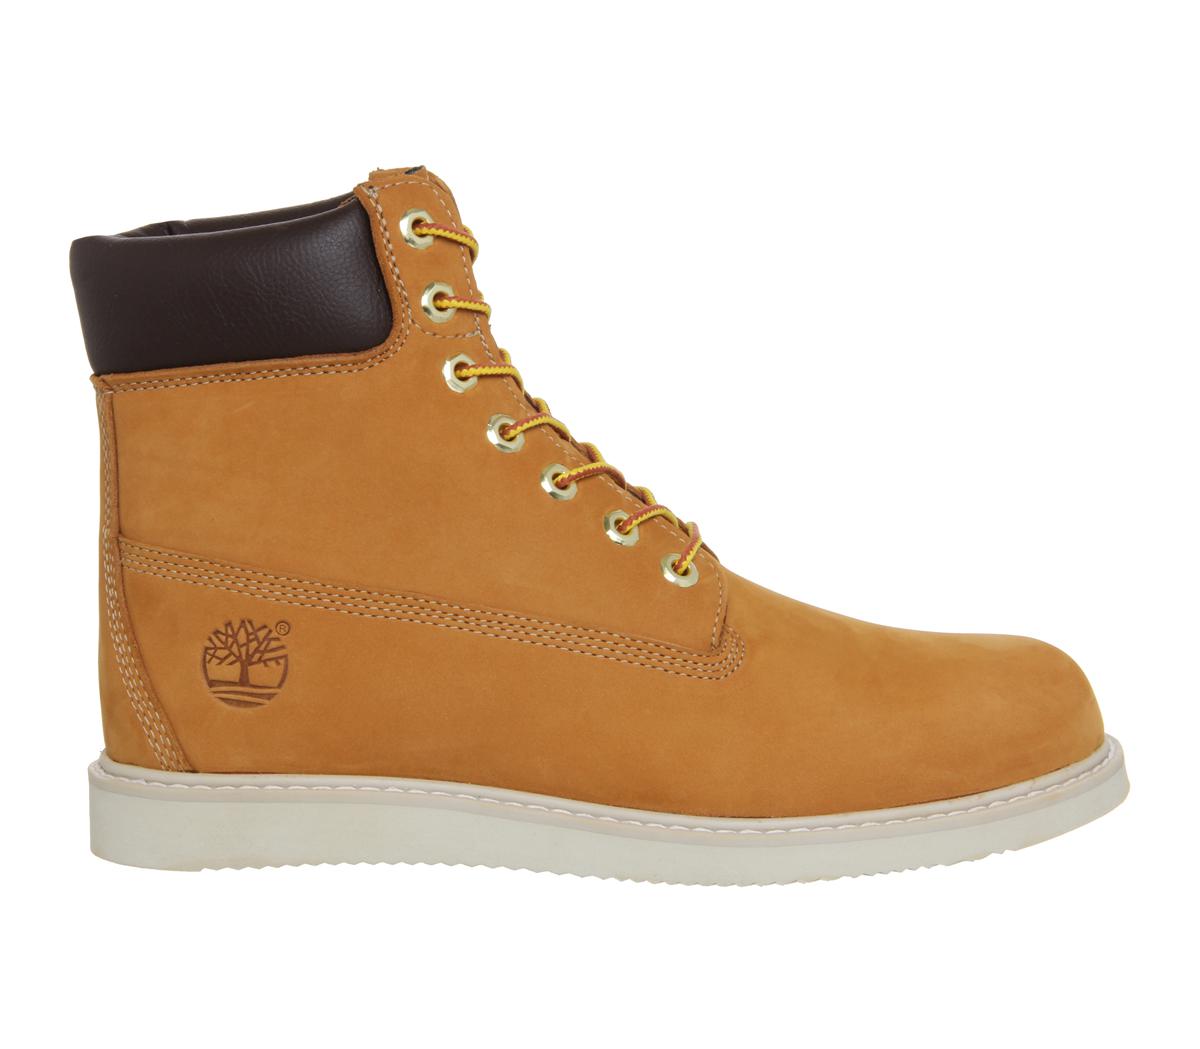 Timberland 6 Inch Wedge Boots in Natural for Men - Lyst